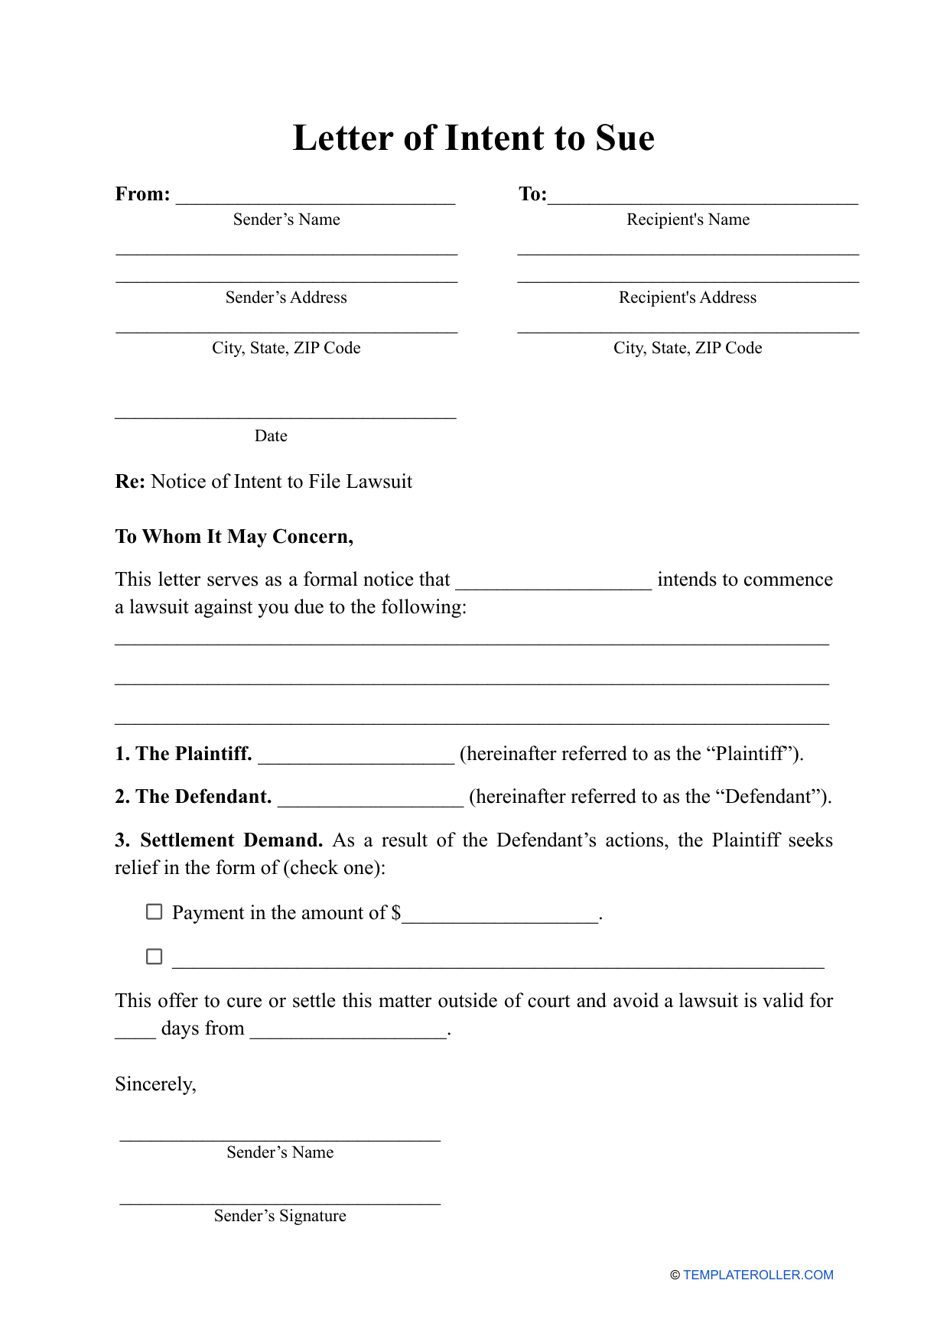 Letter of Intent to Sue Template Preview Image